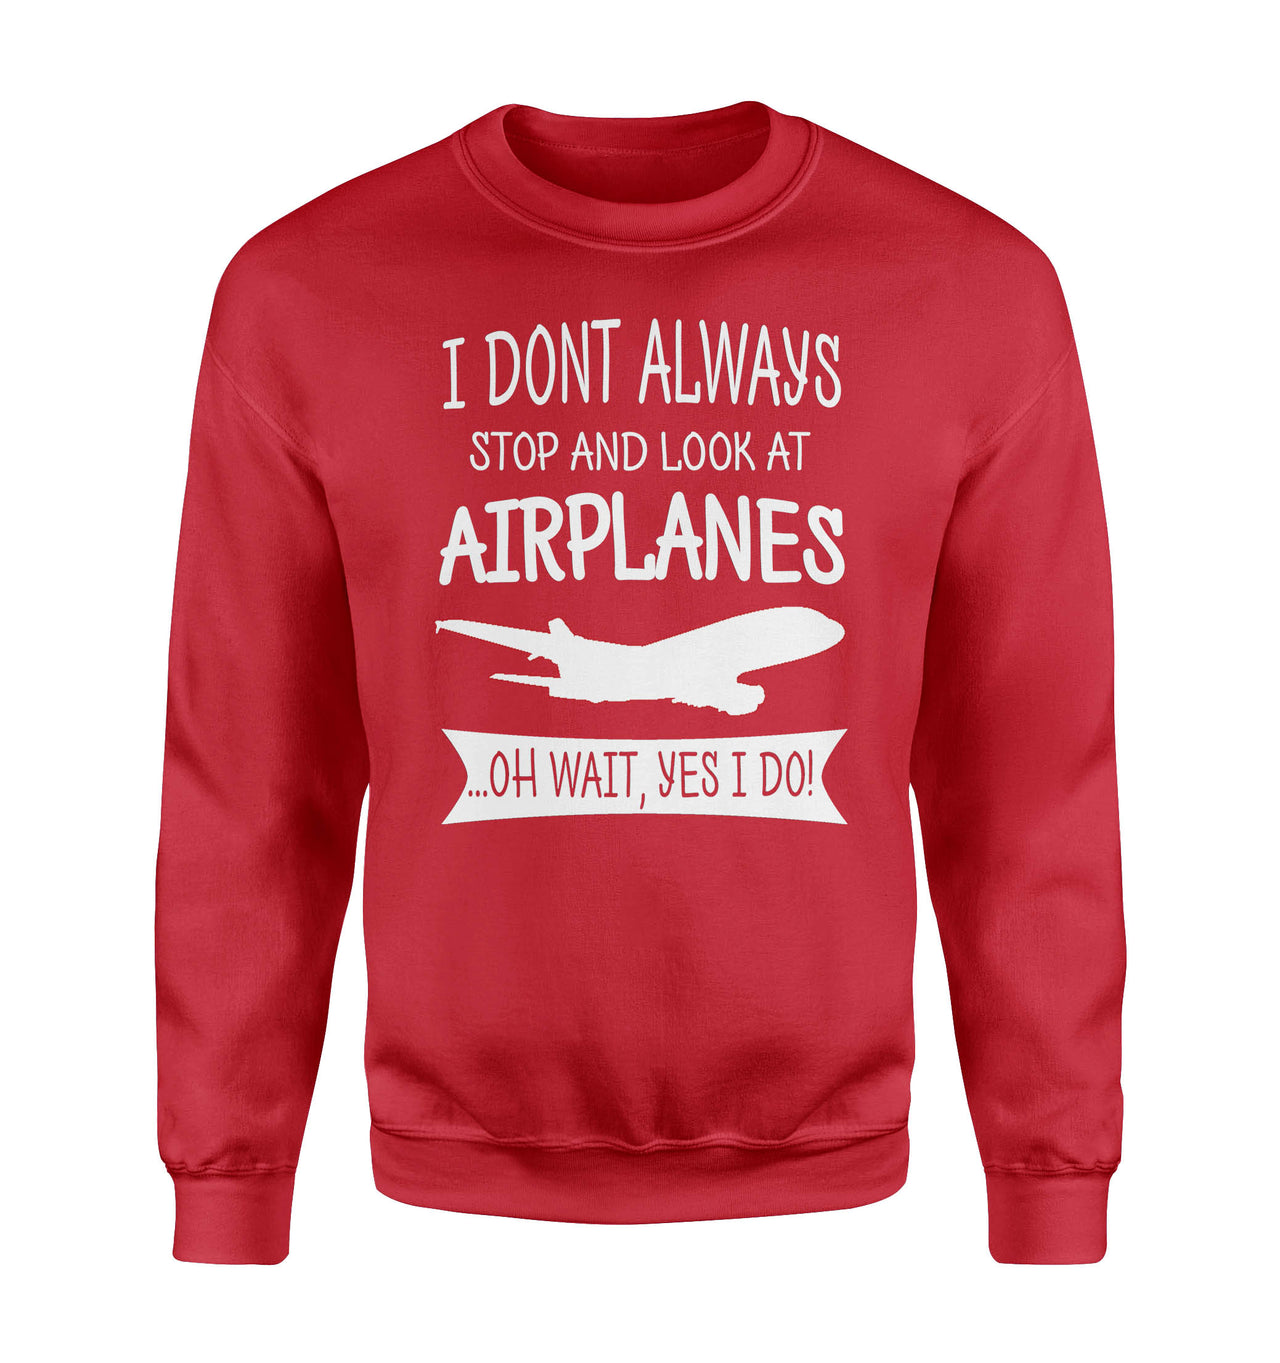 I Don't Always Stop and Look at Airplanes Designed Sweatshirts